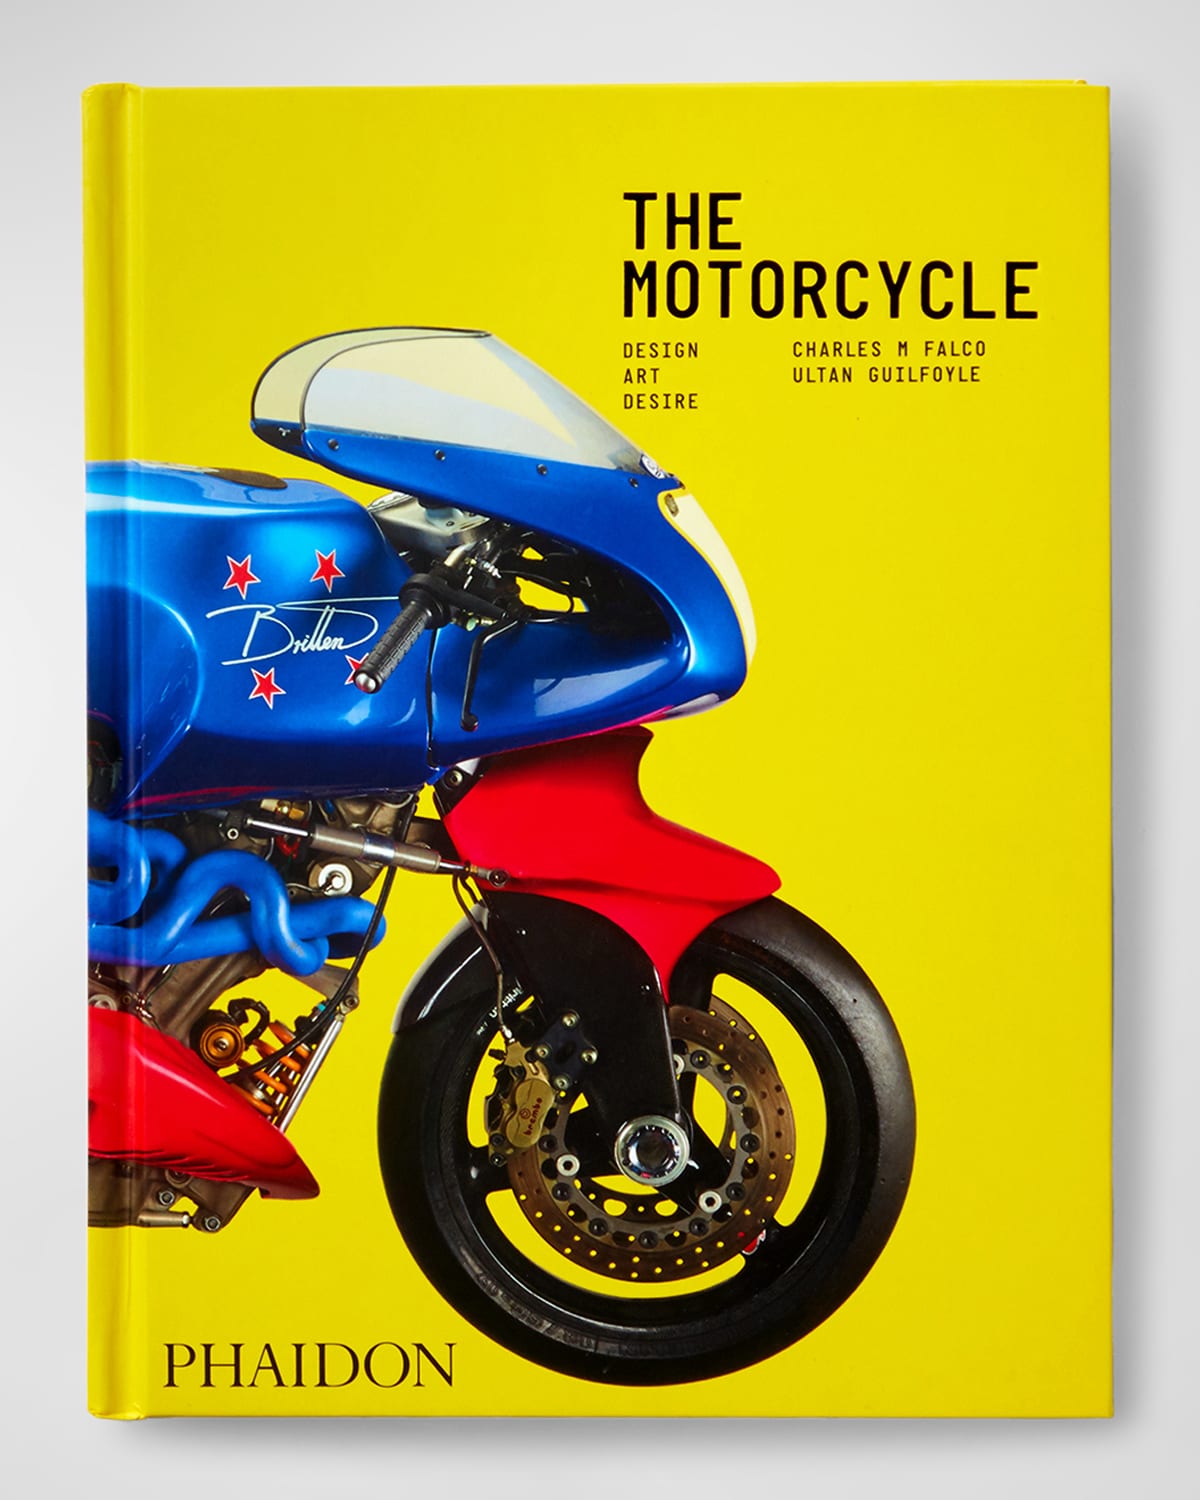 The Motorcycle: Design, Art, Desire Book by Charles M. Falco and Ultan Guilfoyle